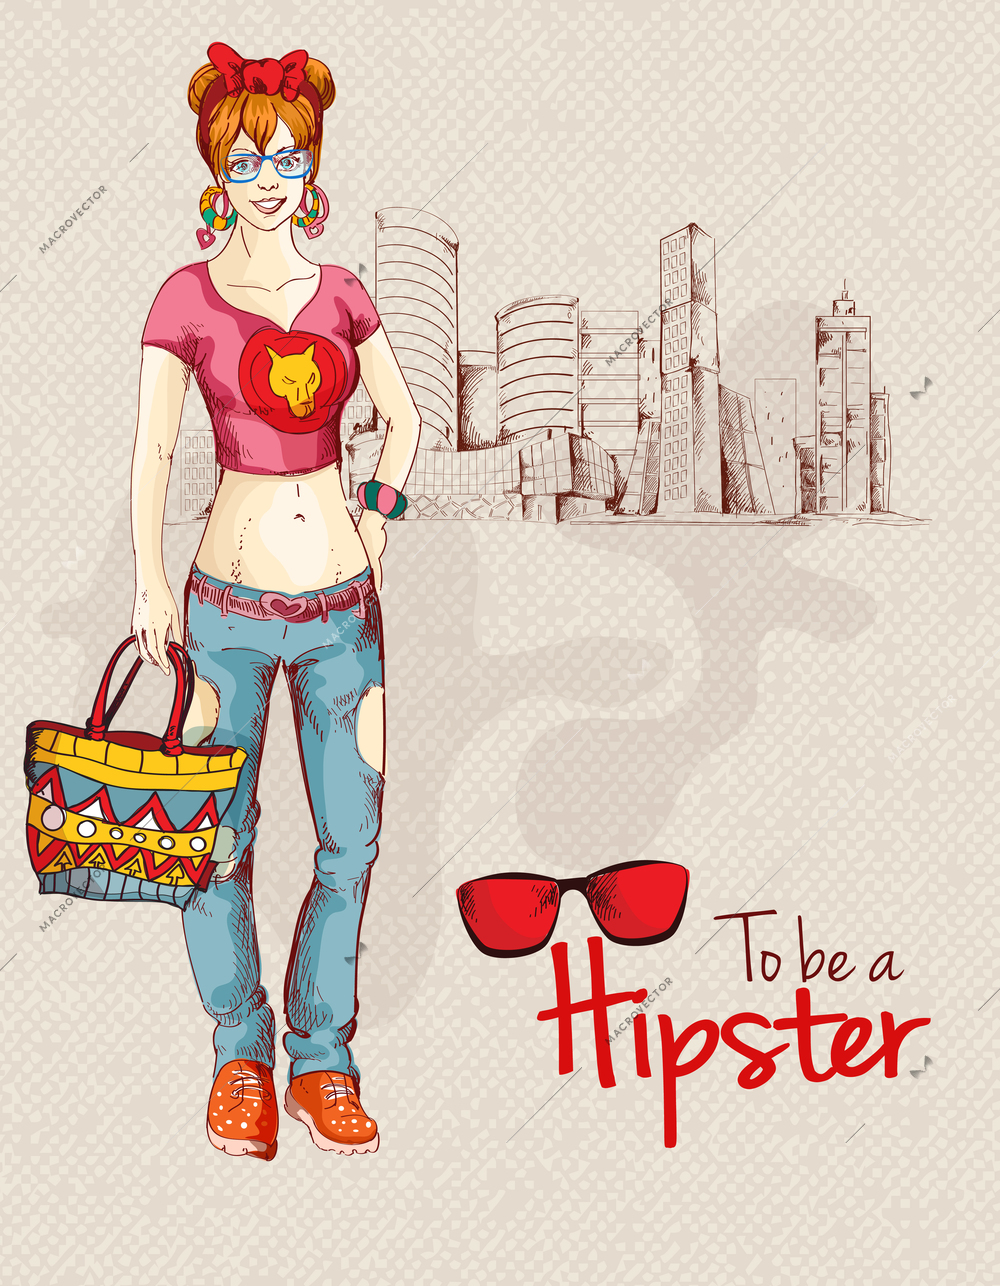 Hipster fashion trendy unban girl sketch character with city background vector illustration